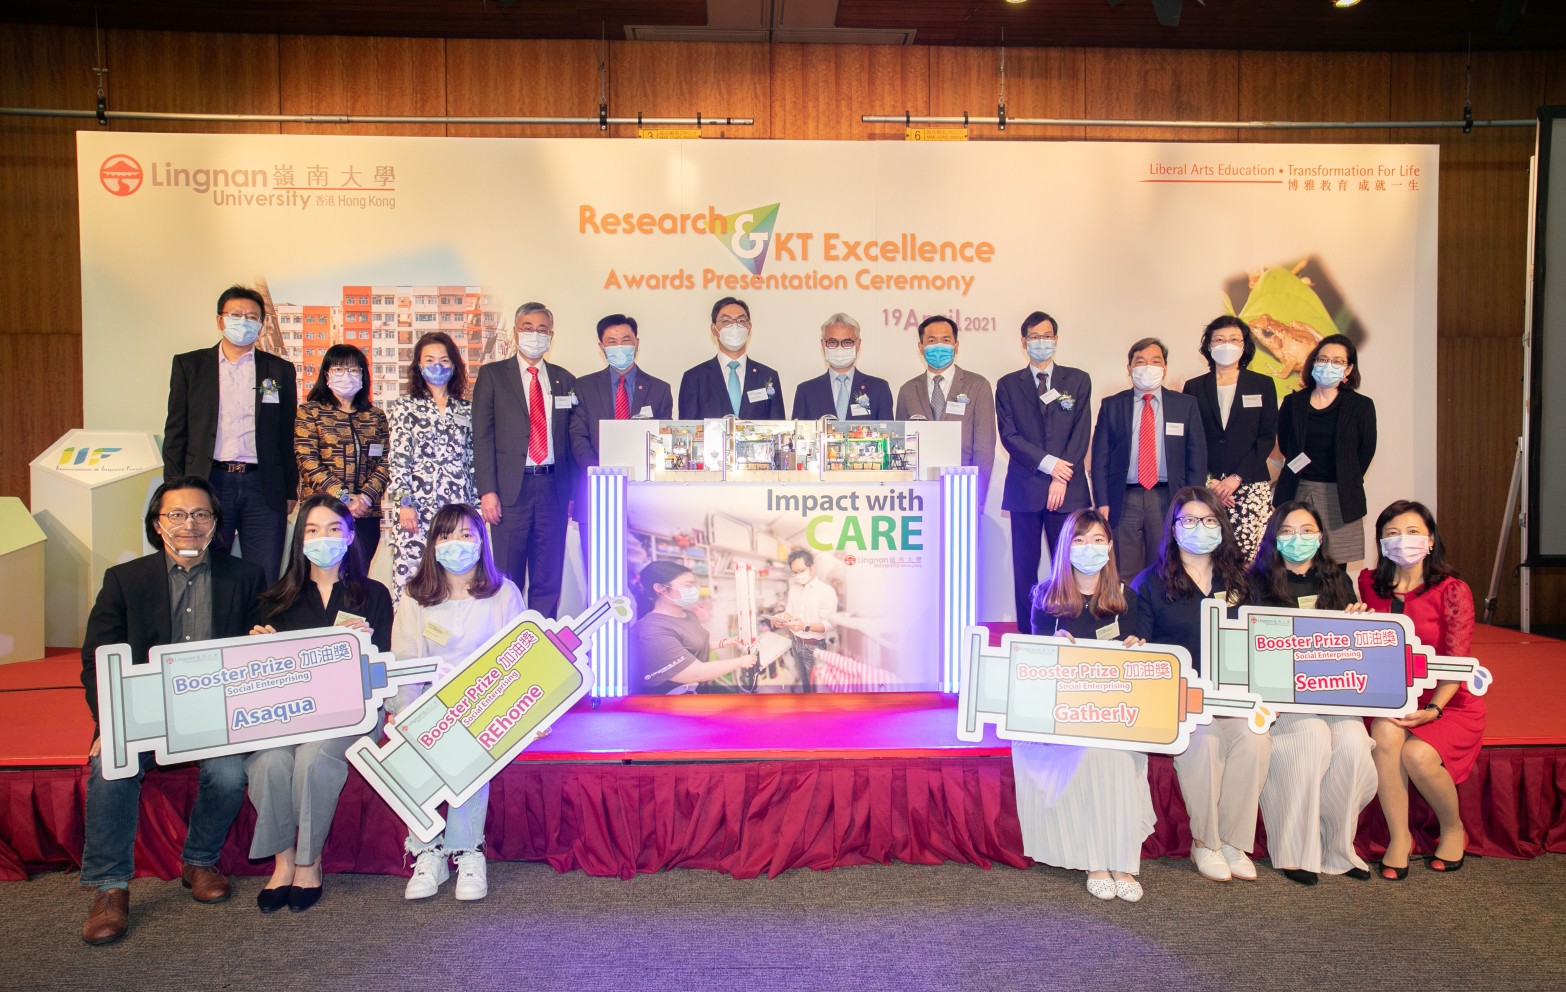 Research and Knowledge Transfer Excellence Awards Presentation Ceremony